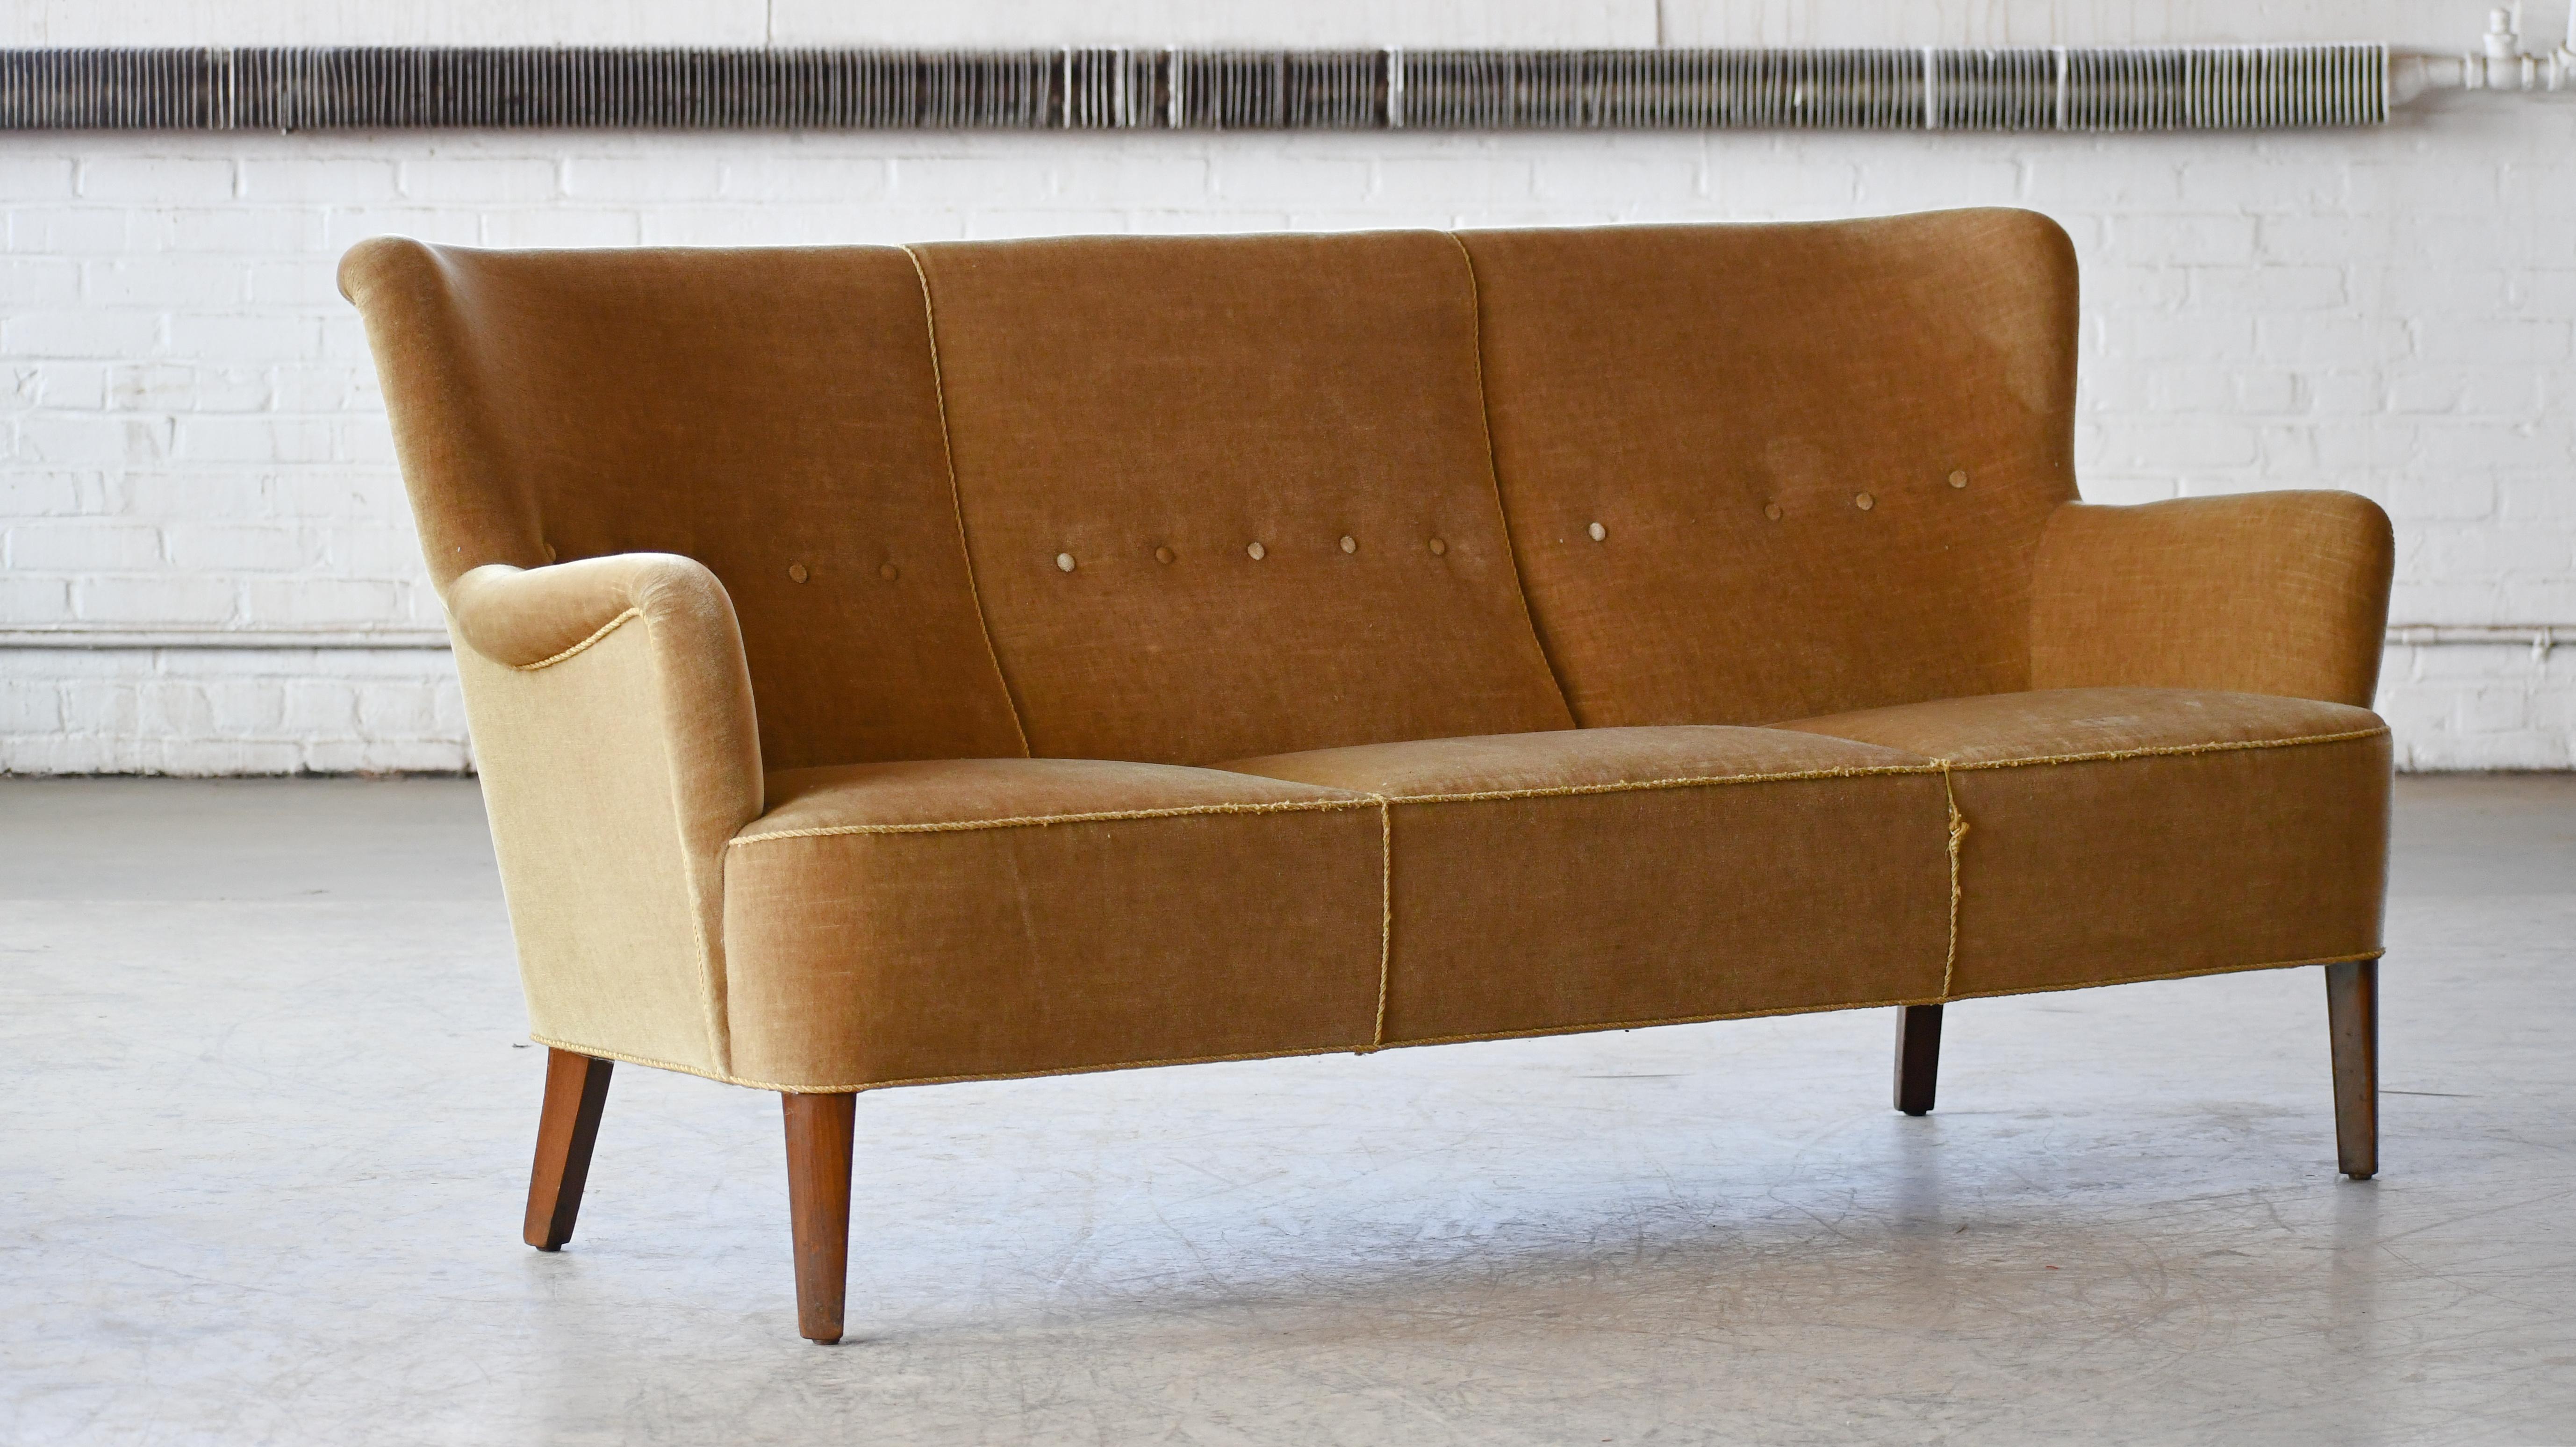 Orla Mølgaard-Nielsen's significant work has been mainly carried out together with his partner, Peter Hvidt, but the designer’s earlier models - like this sofa - are widely renowned for their understated elegance and quality. This rare sofa was